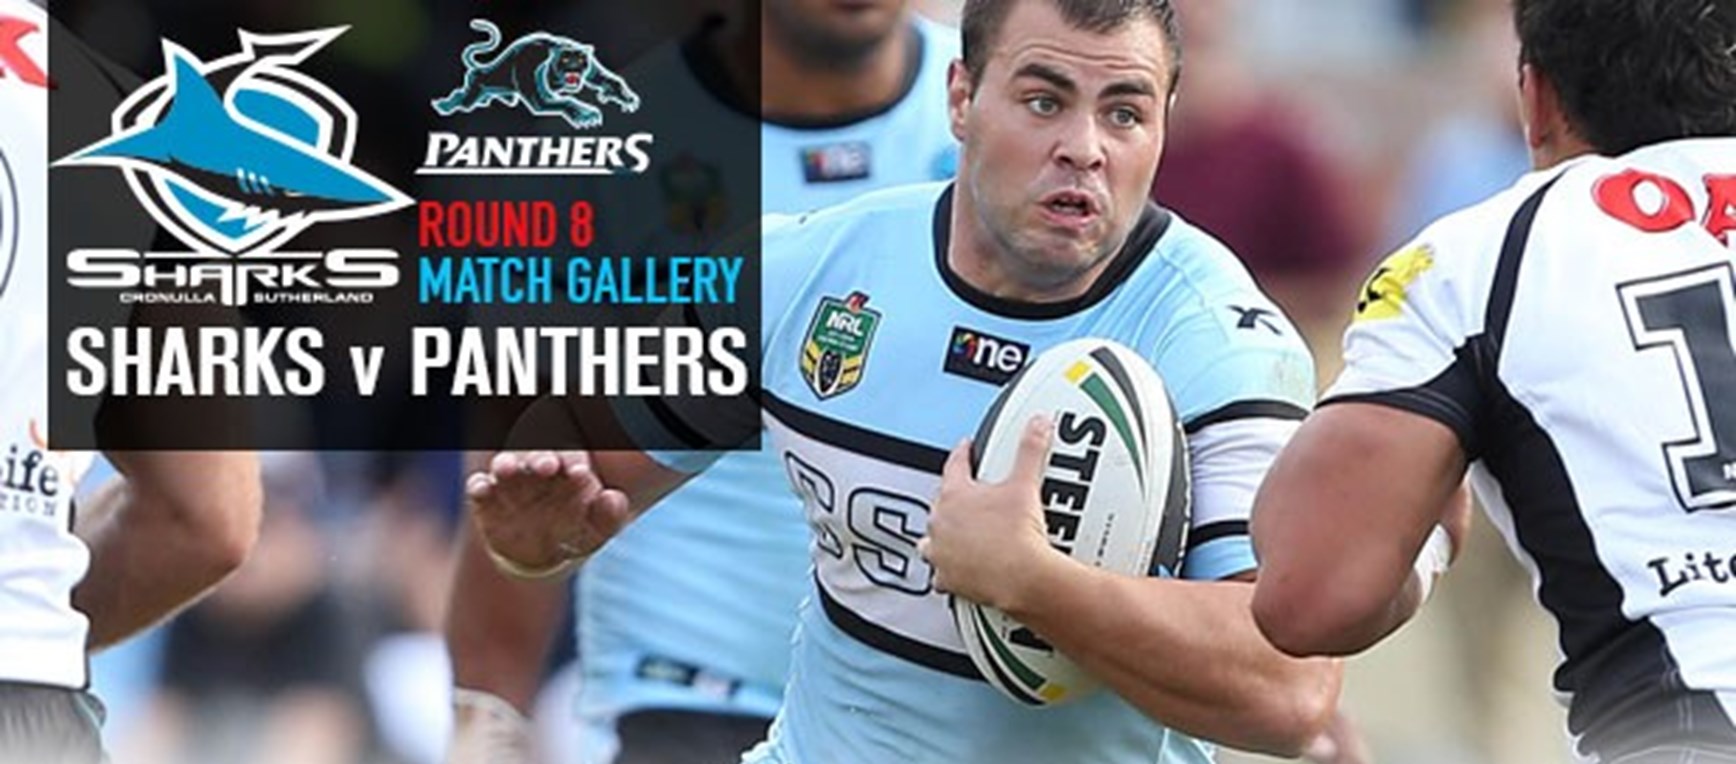 Rd 8 Sharks v Panthers Match Gallery